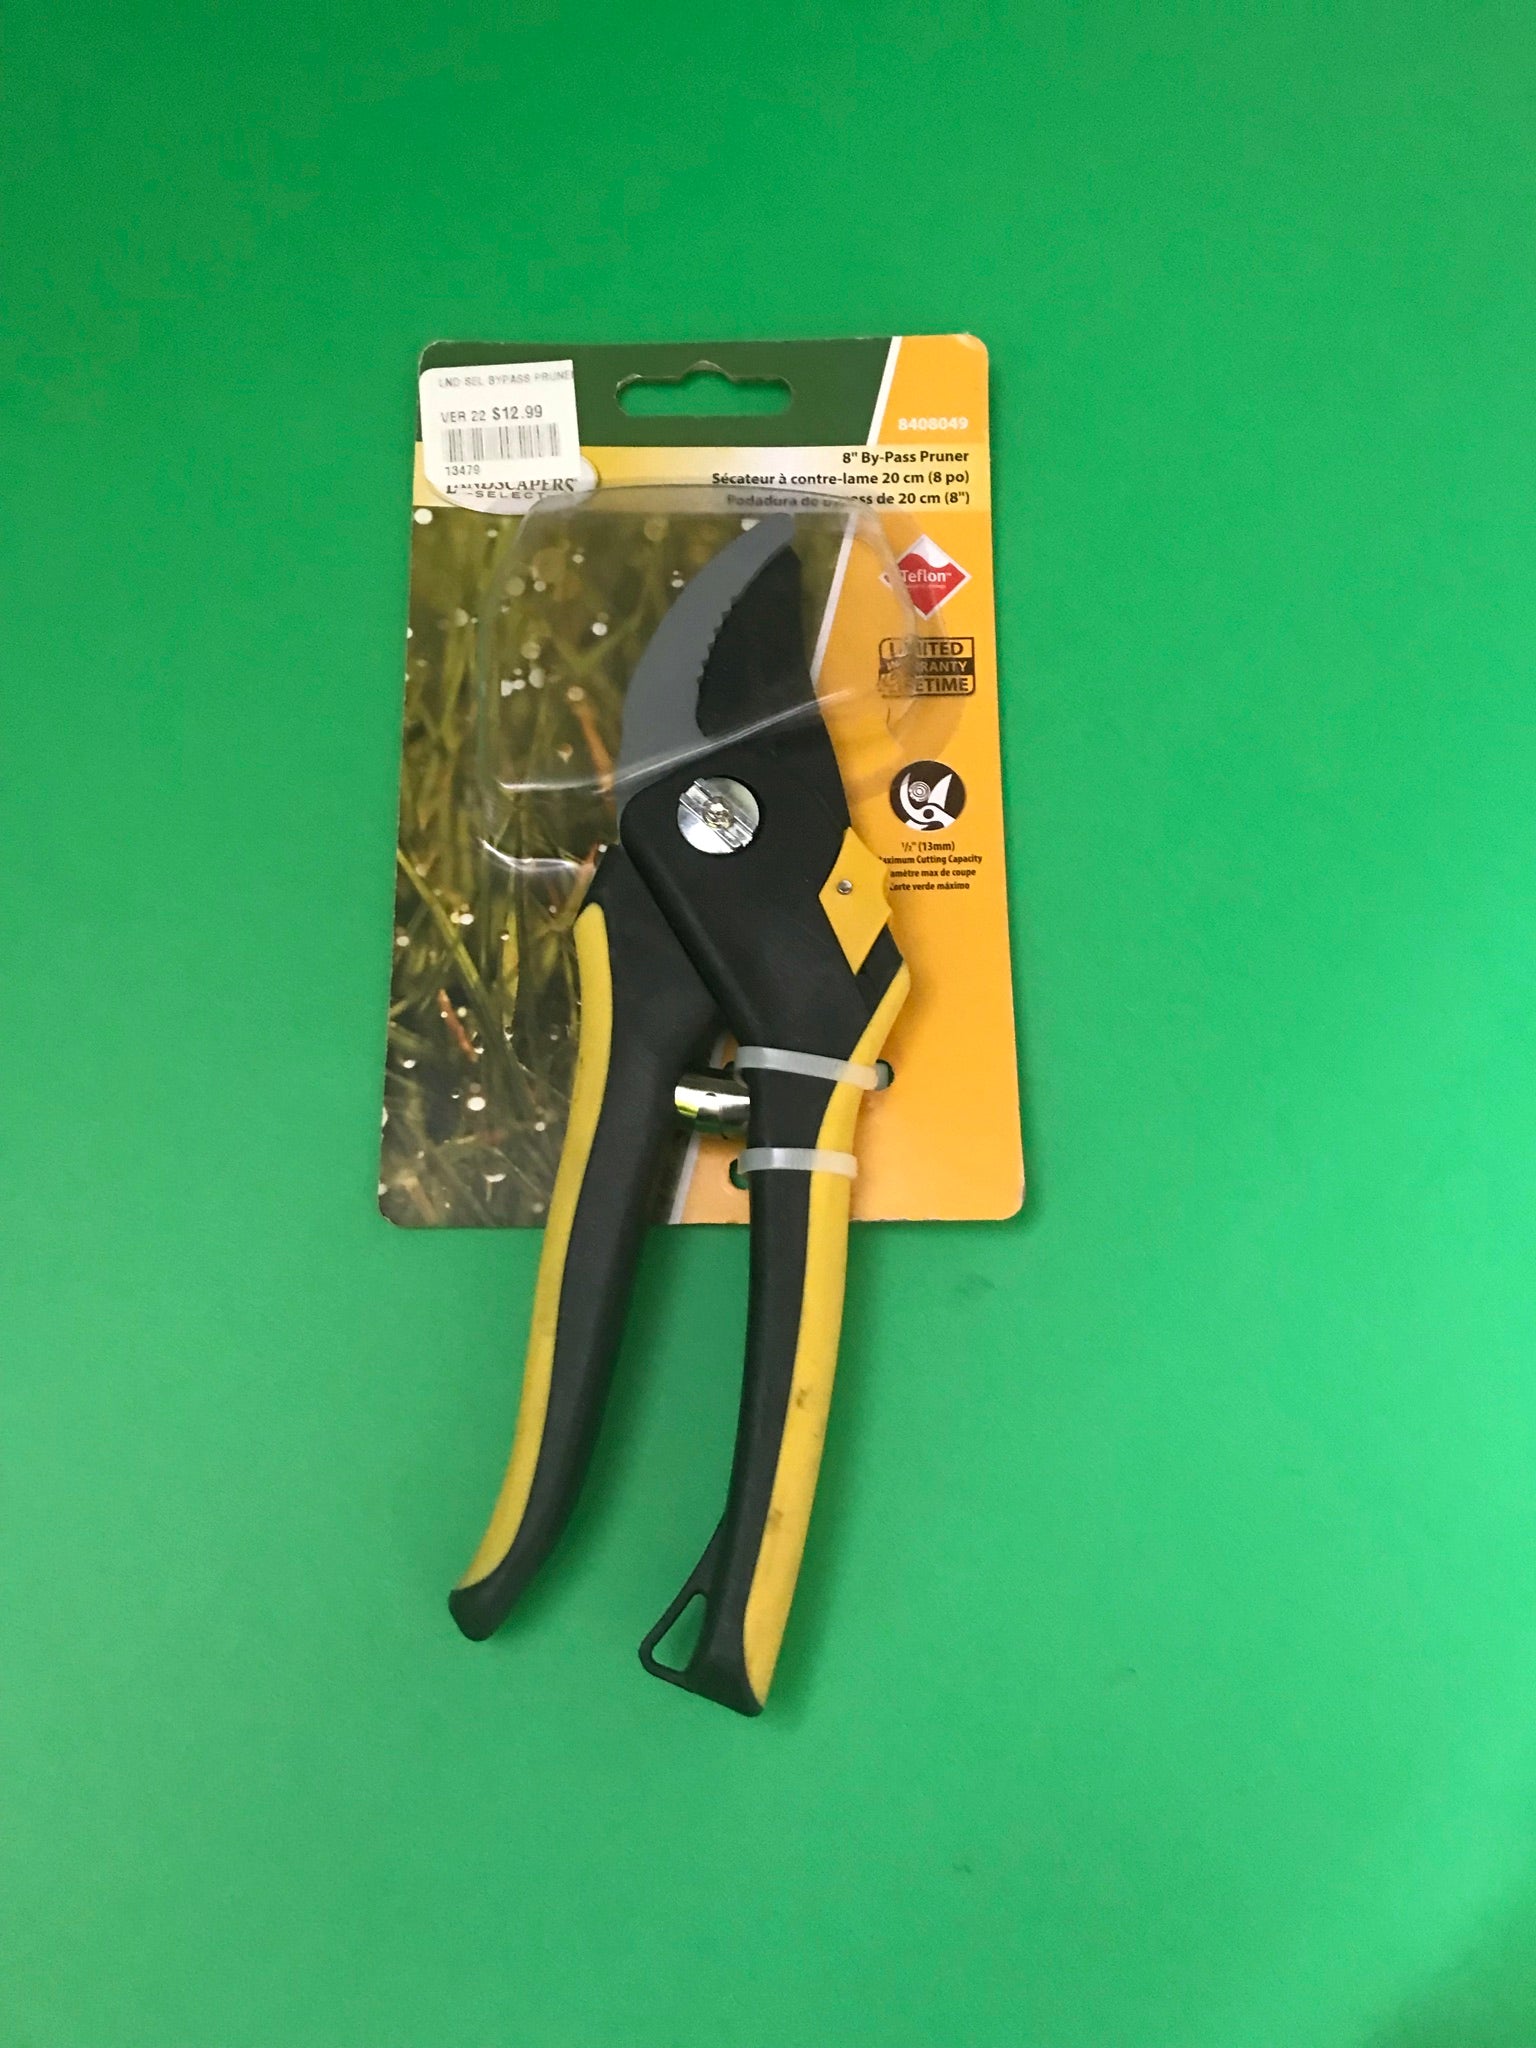 Landscapers Select 8" By-Pass Pruning Shears